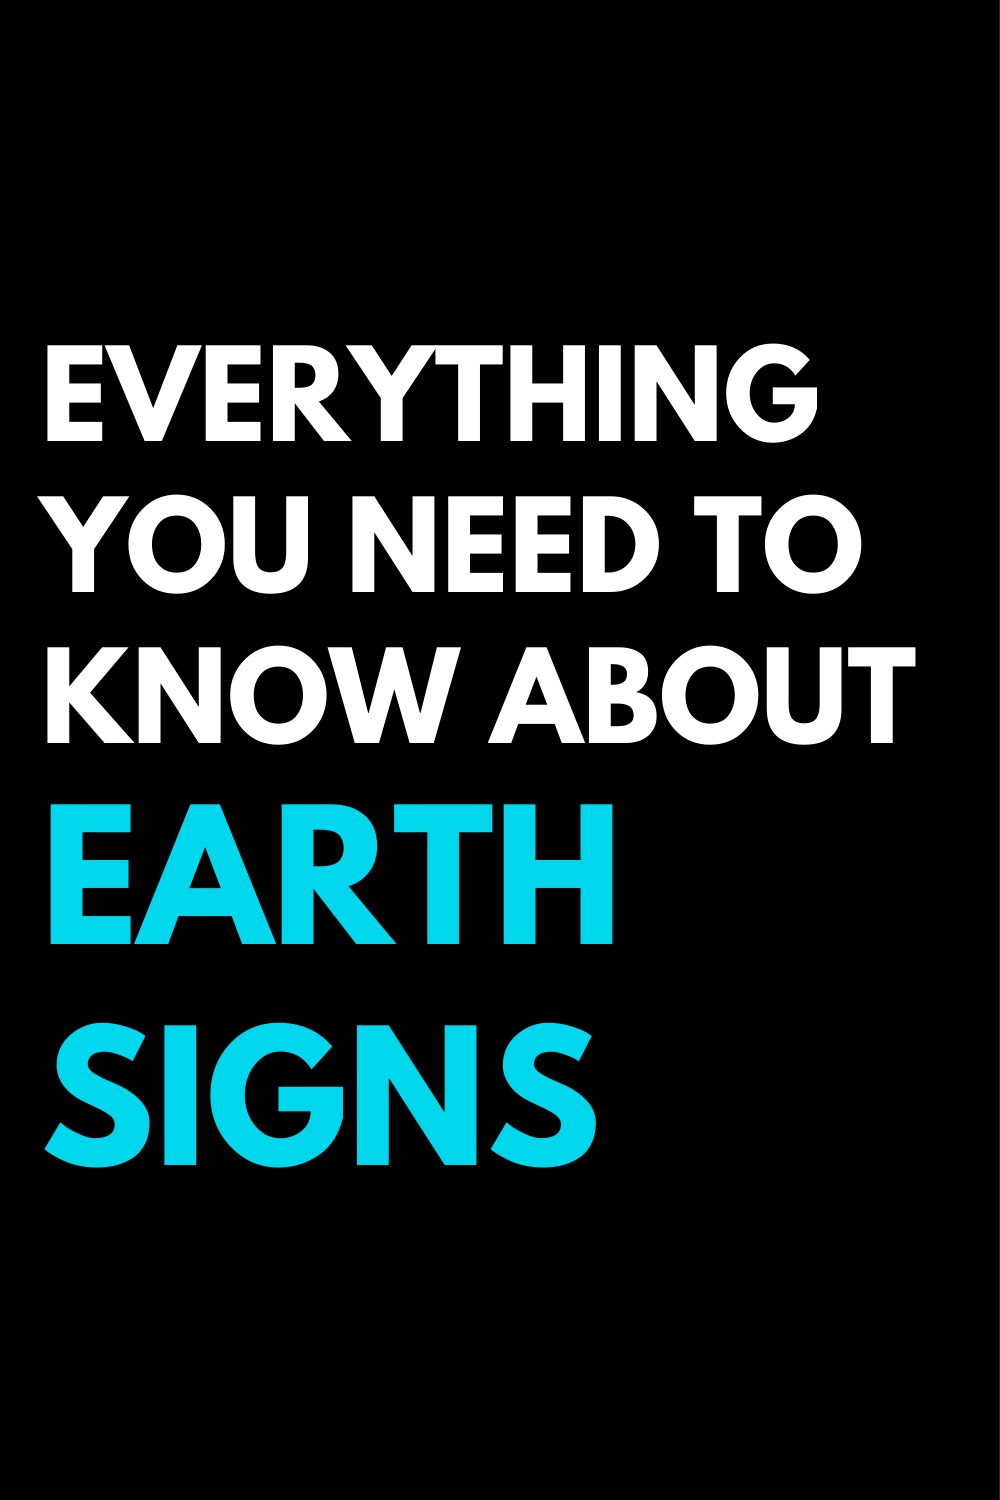 Everything you need to know about Earth signs: Taurus, Virgo and Capricorn